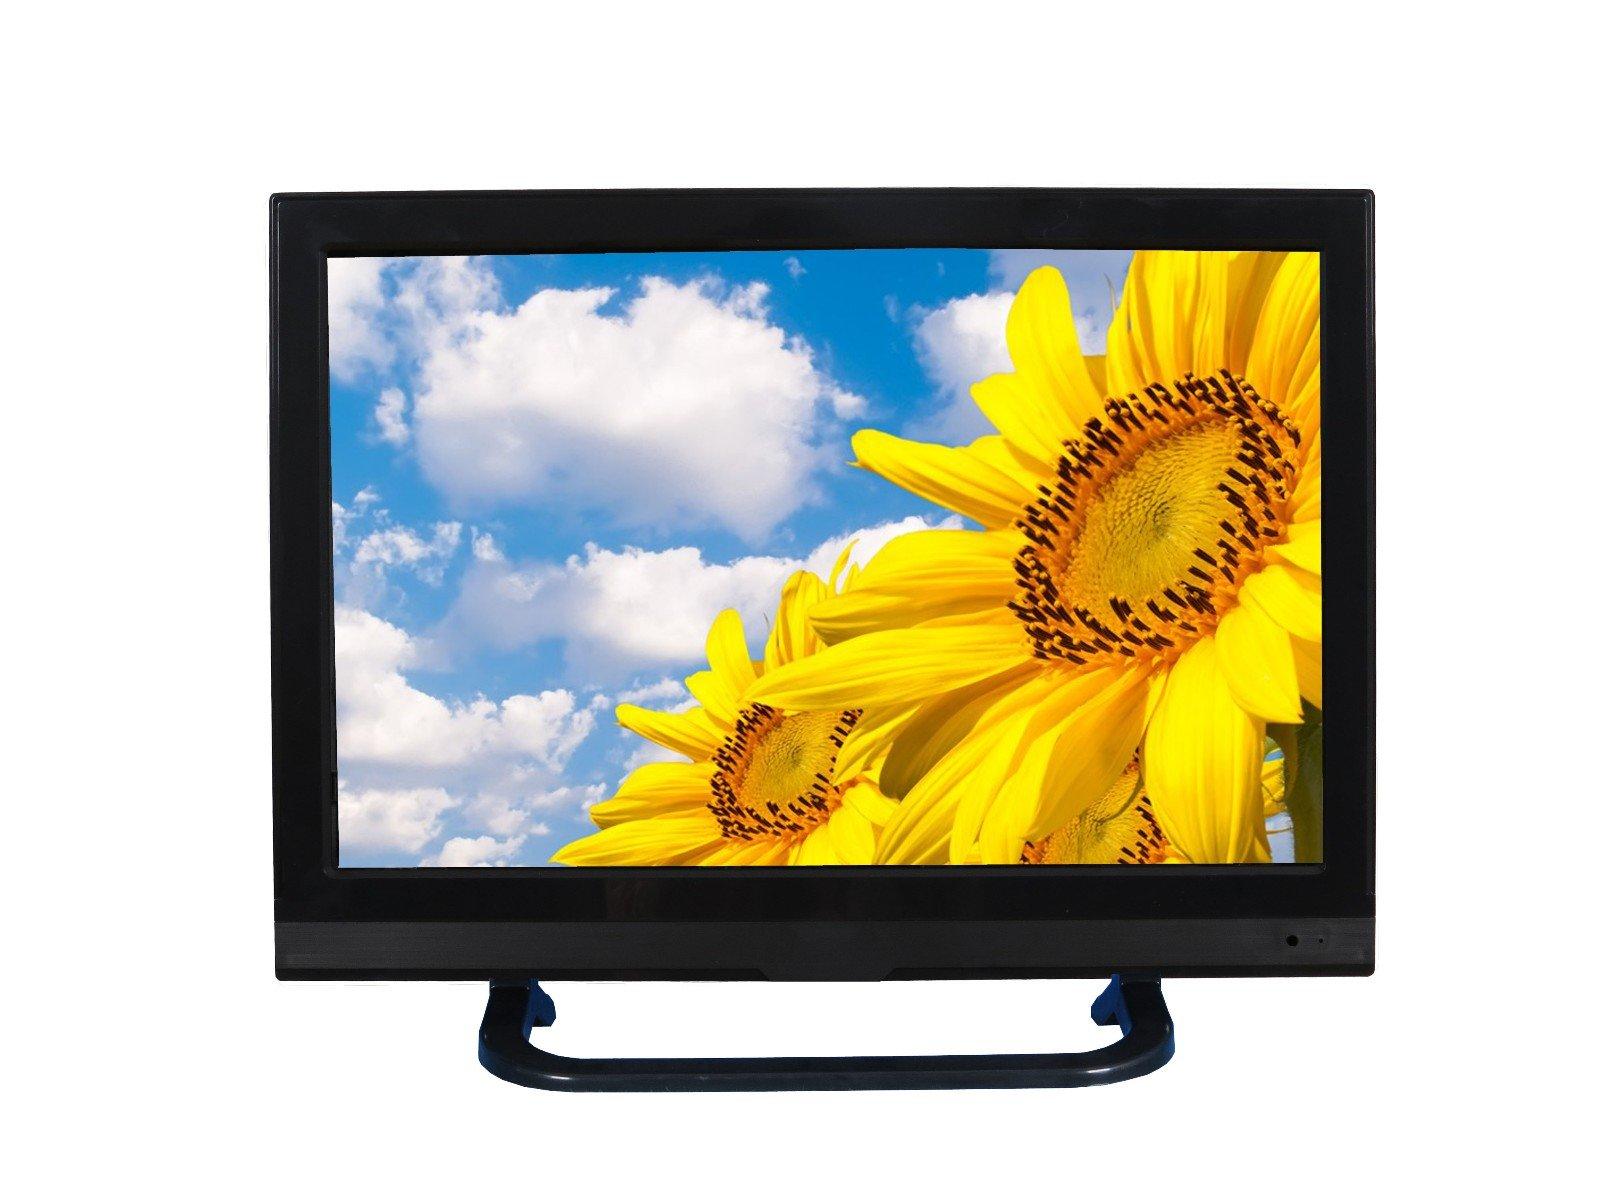 Xinyao LCD 20 inch tv price manufacturer for lcd screen